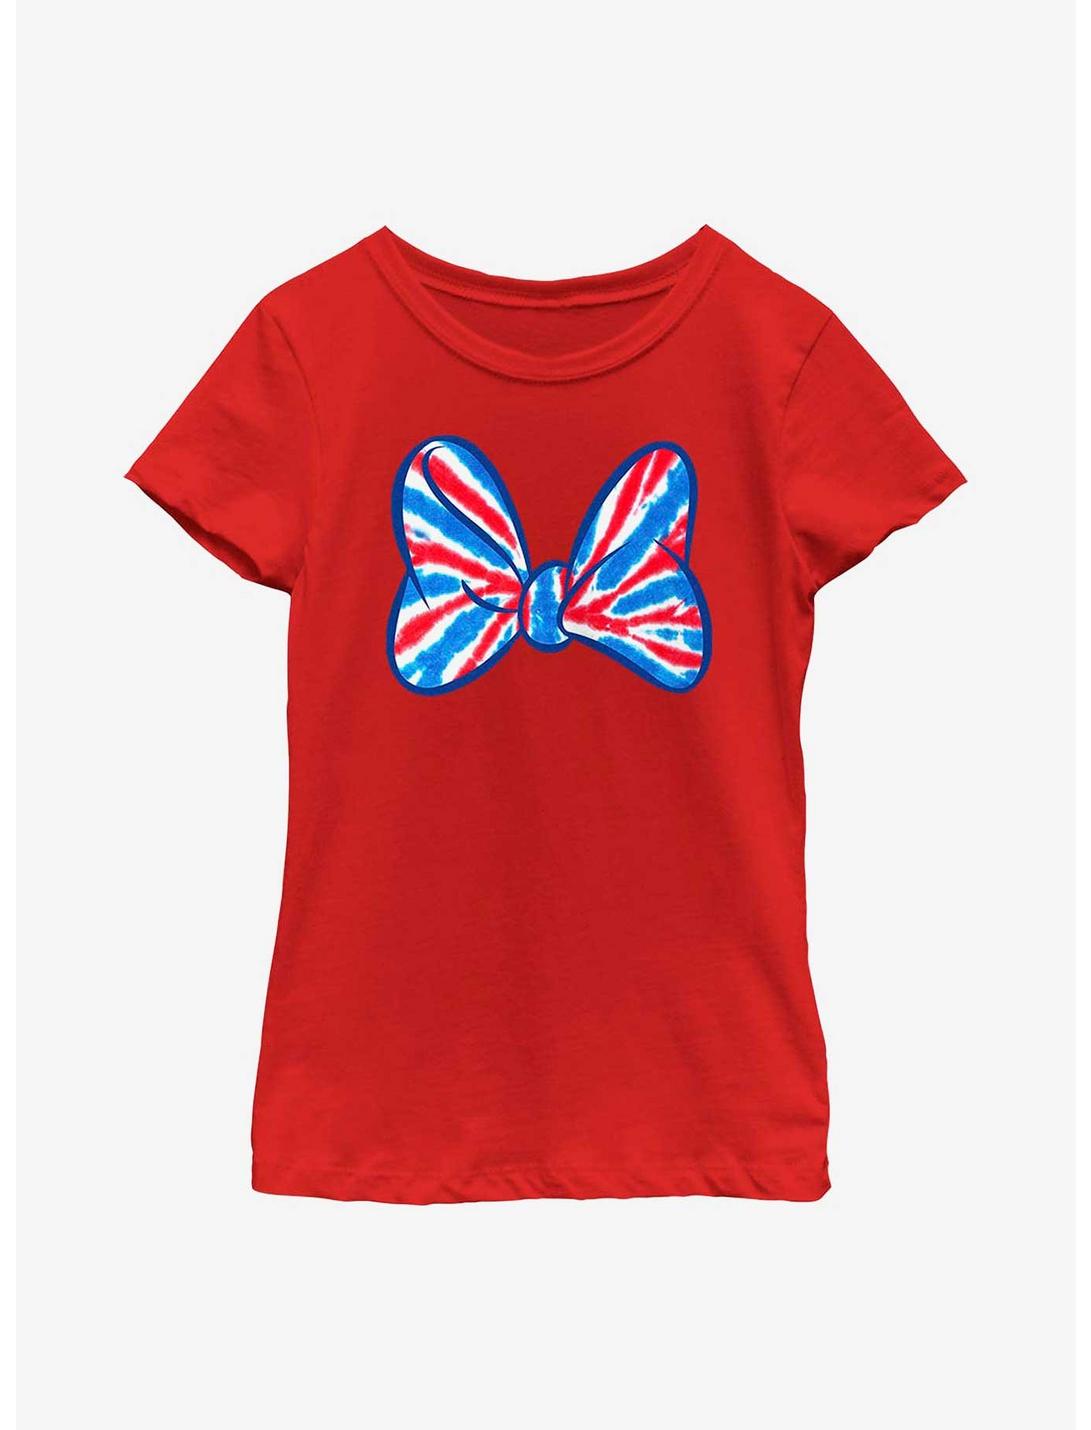 Disney Minnie Mouse Americana Bow Youth Girls T-Shirt, RED, hi-res